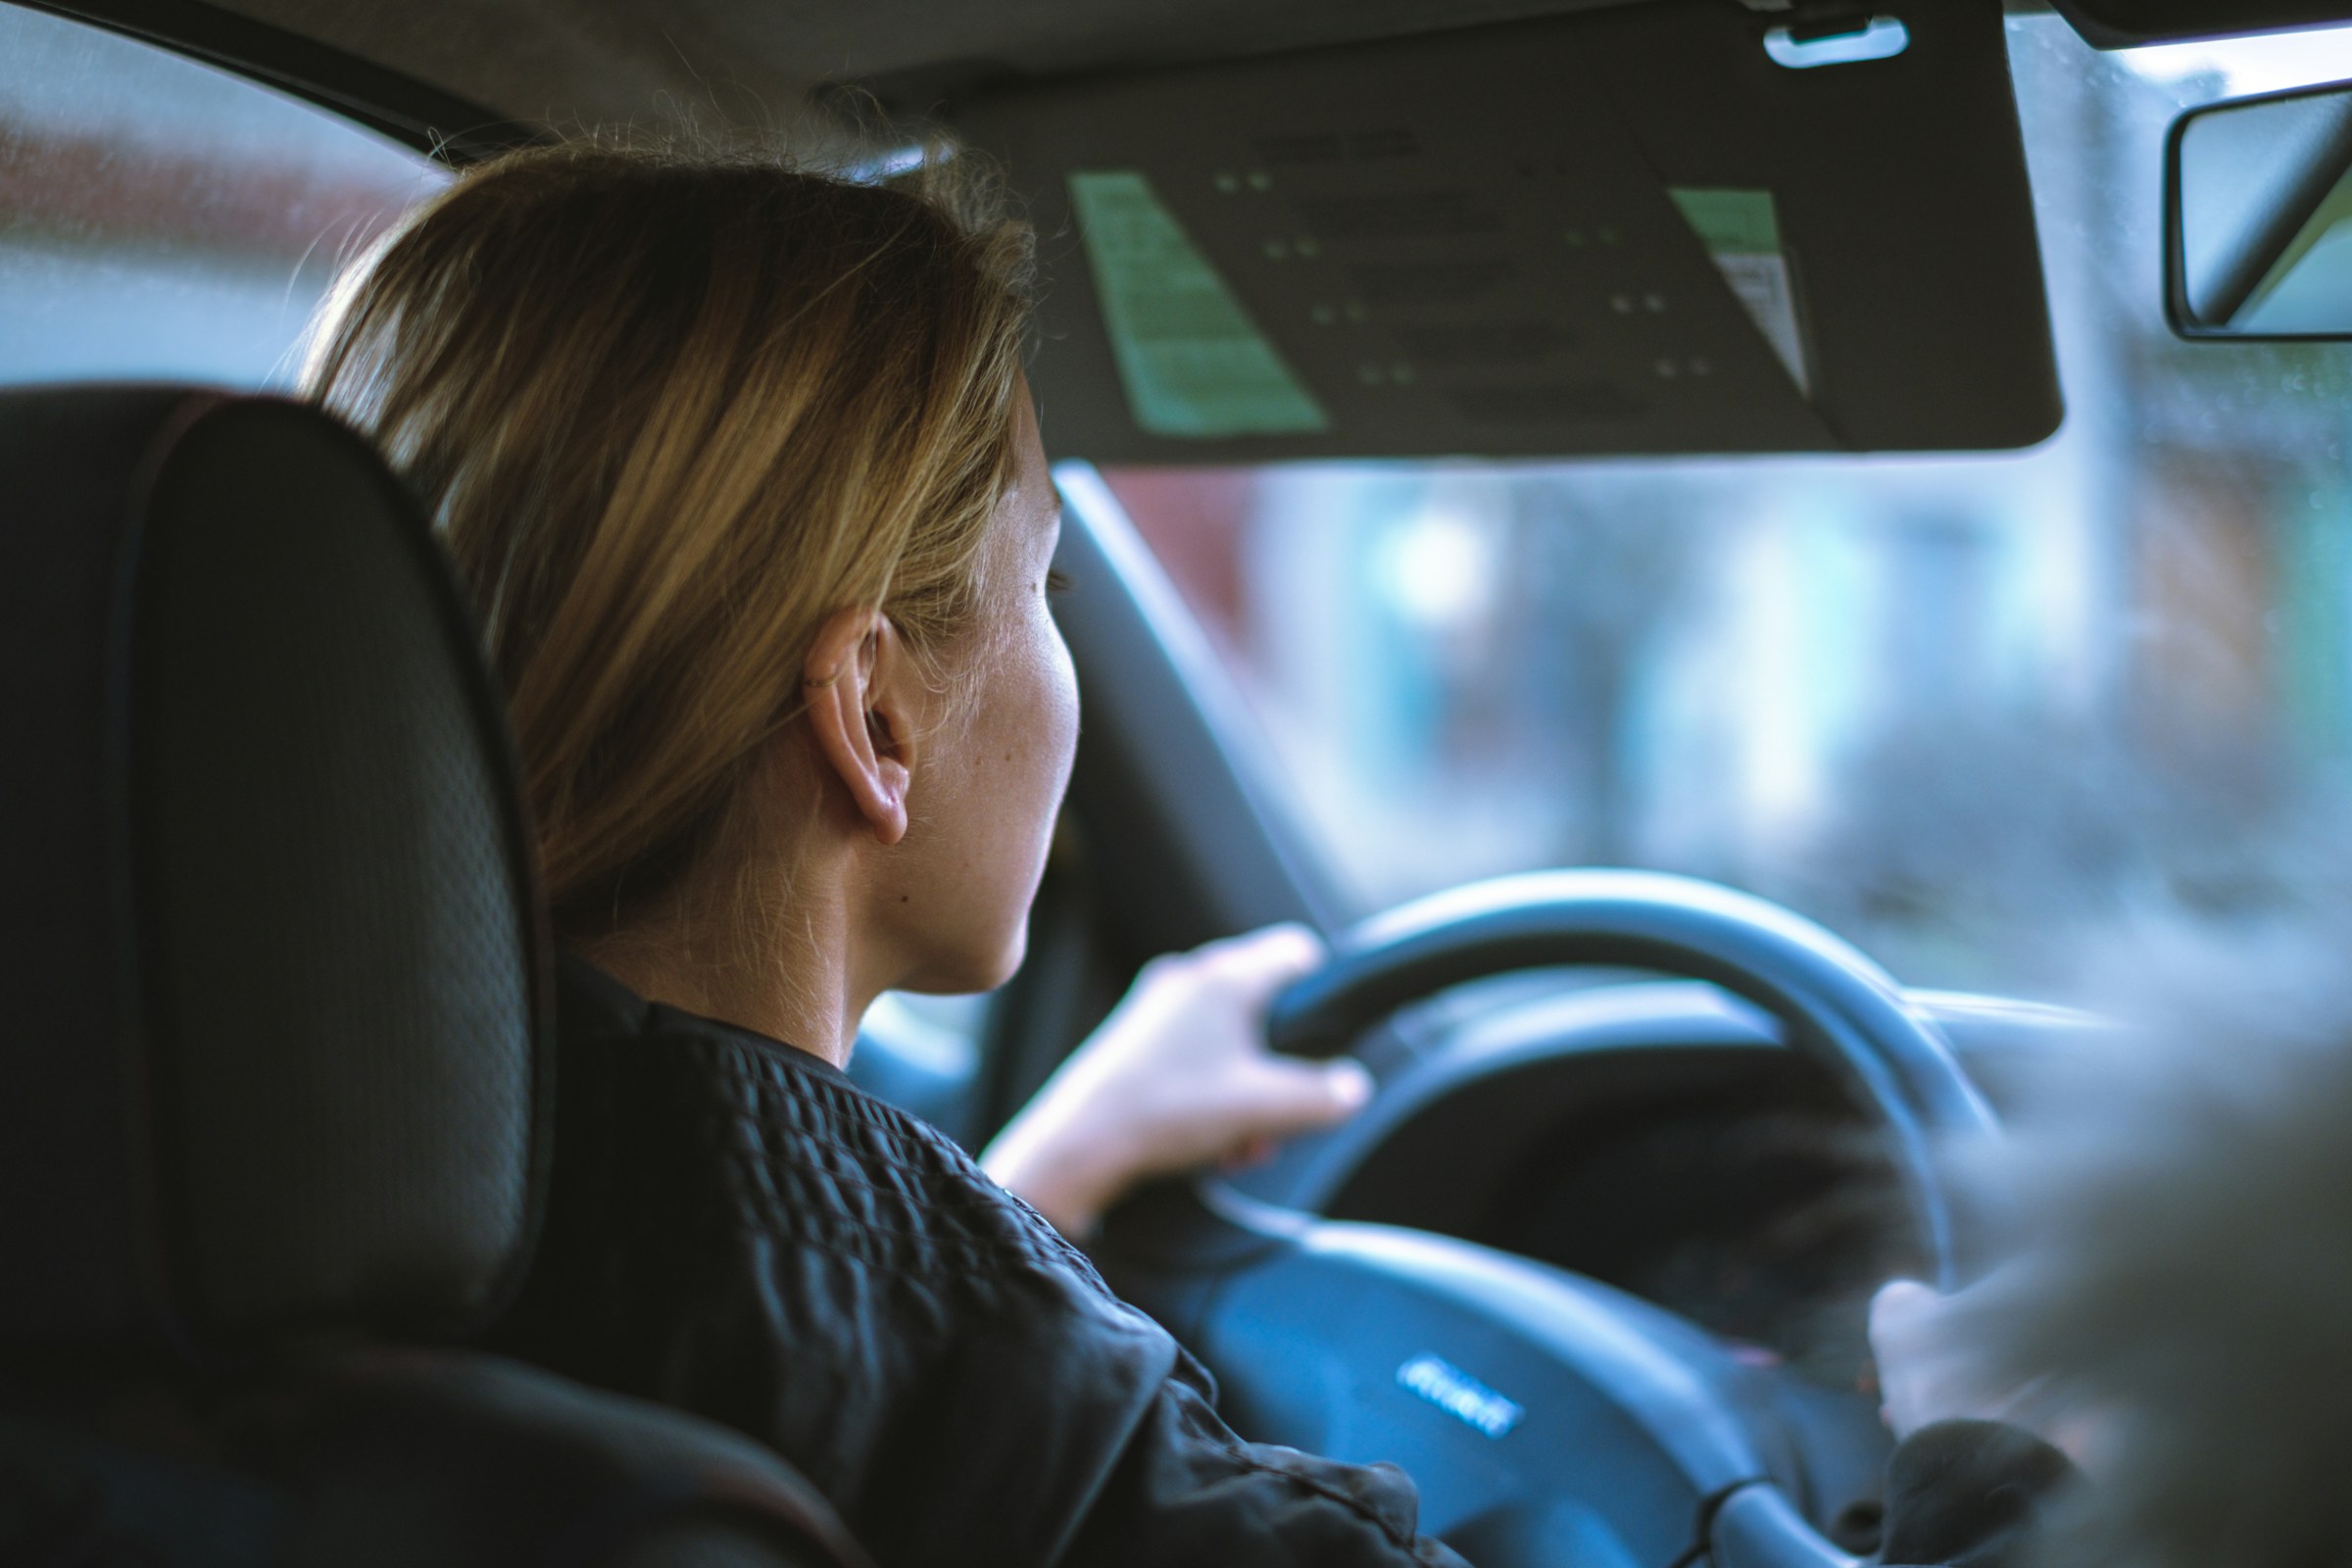 A worried woman driving her car | Source: Unsplash